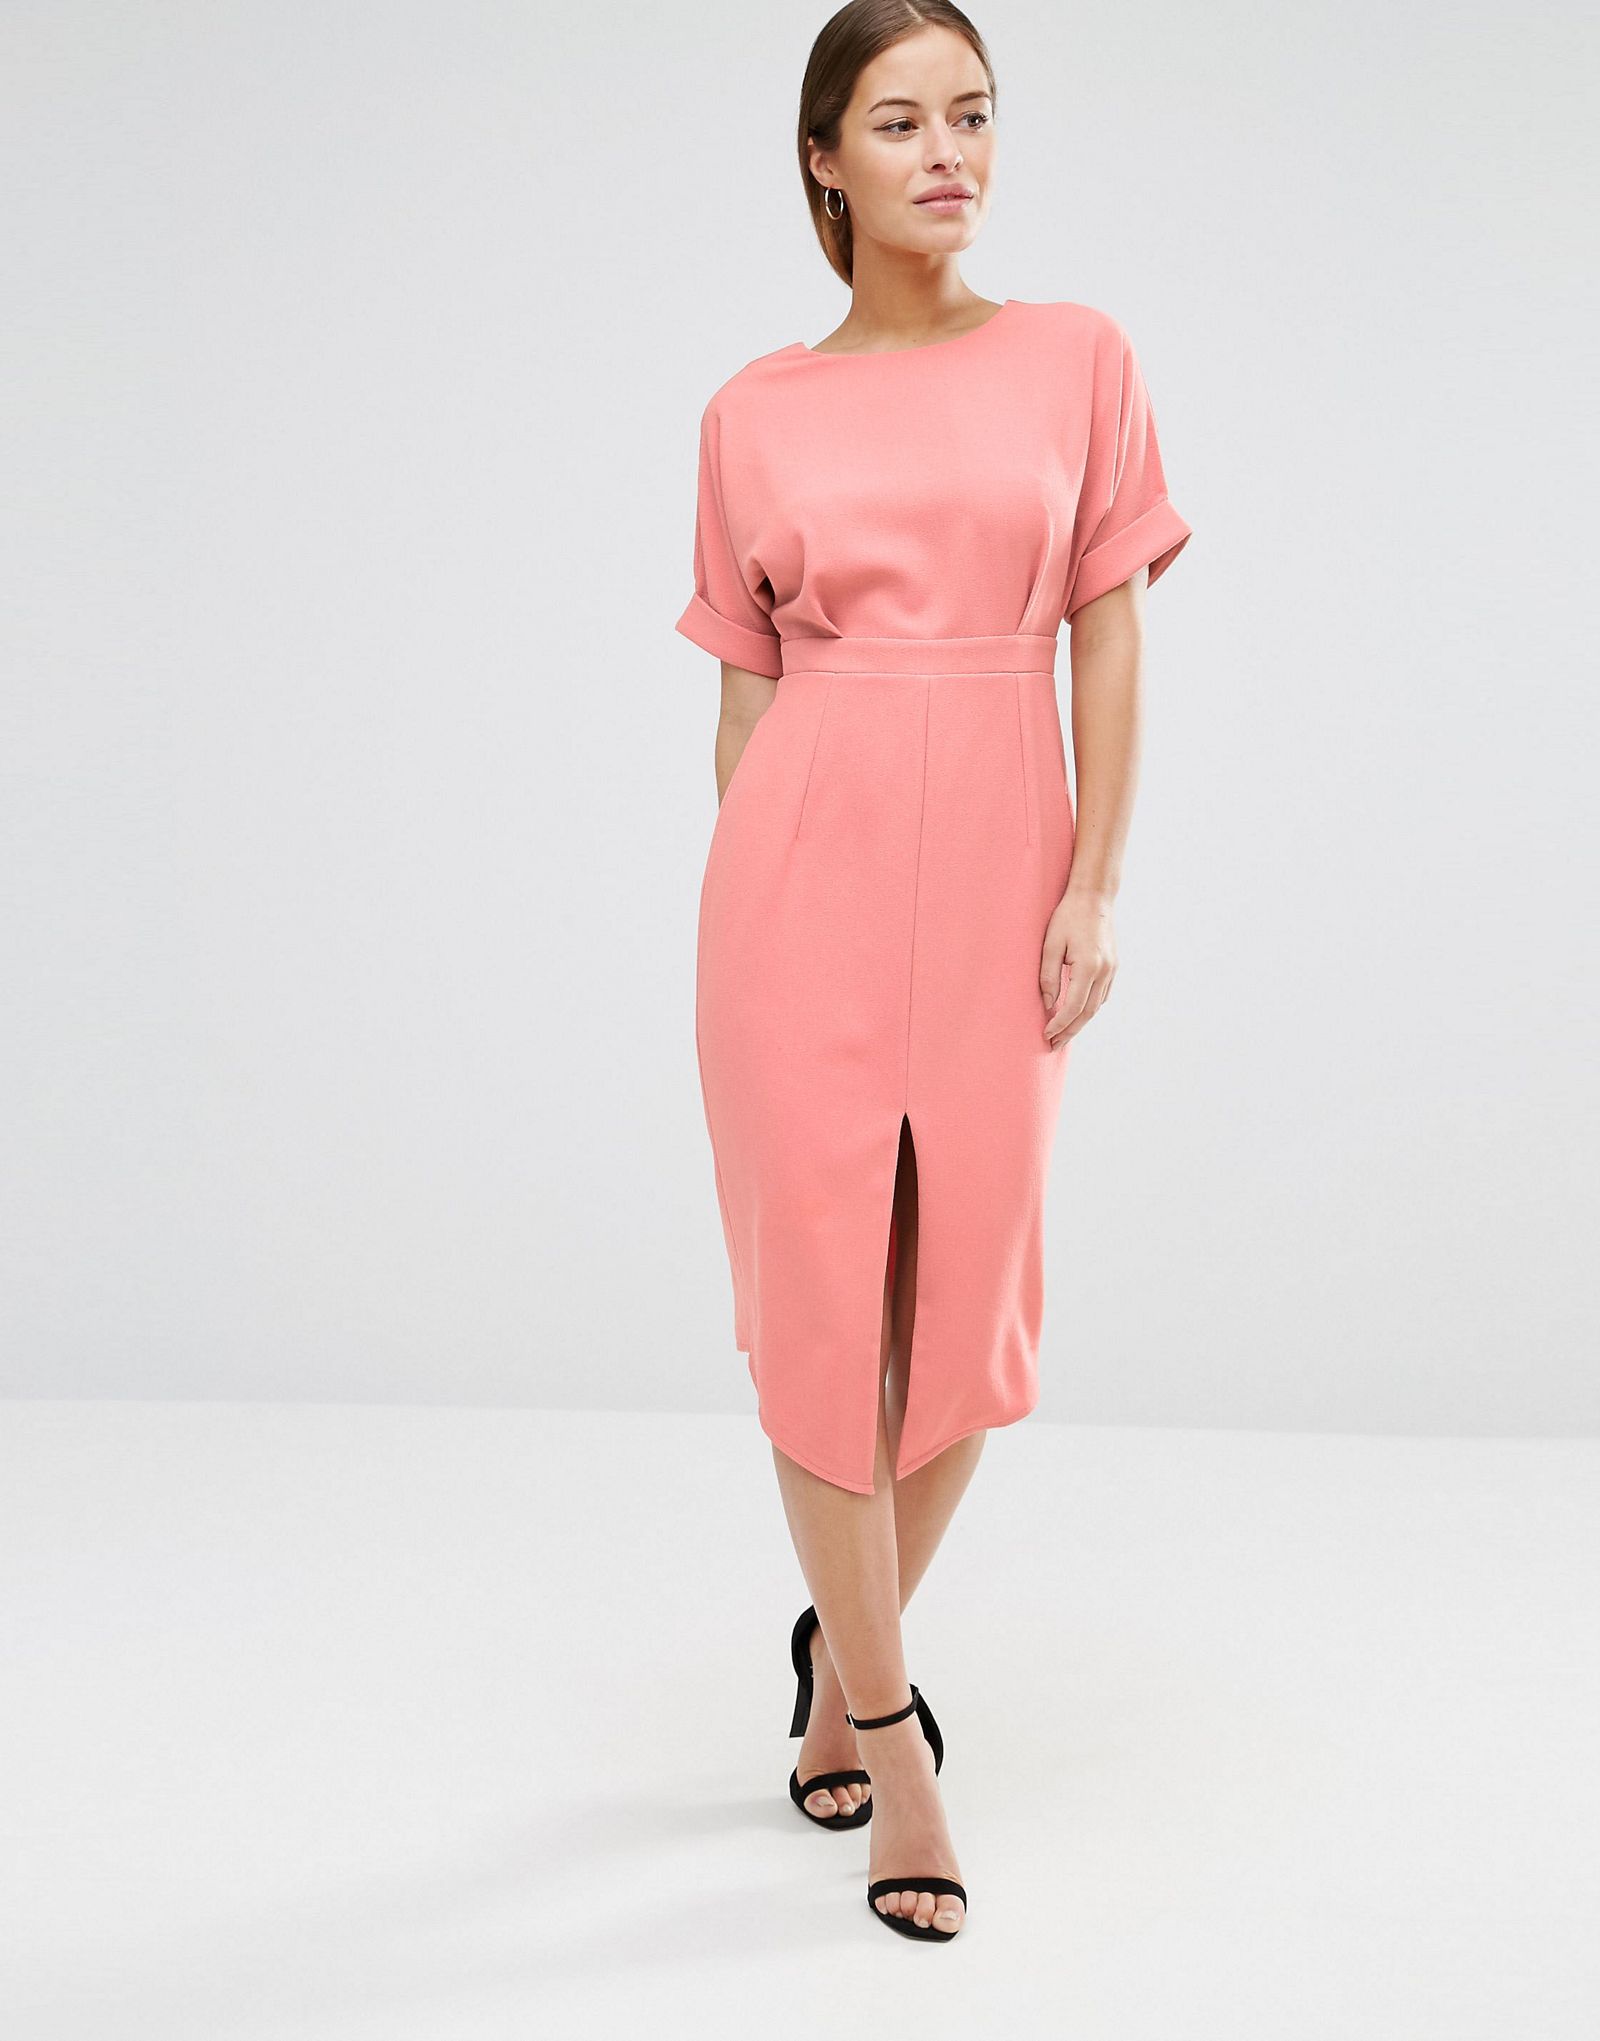 ASOS PETITE Wiggle Dress with Split Front